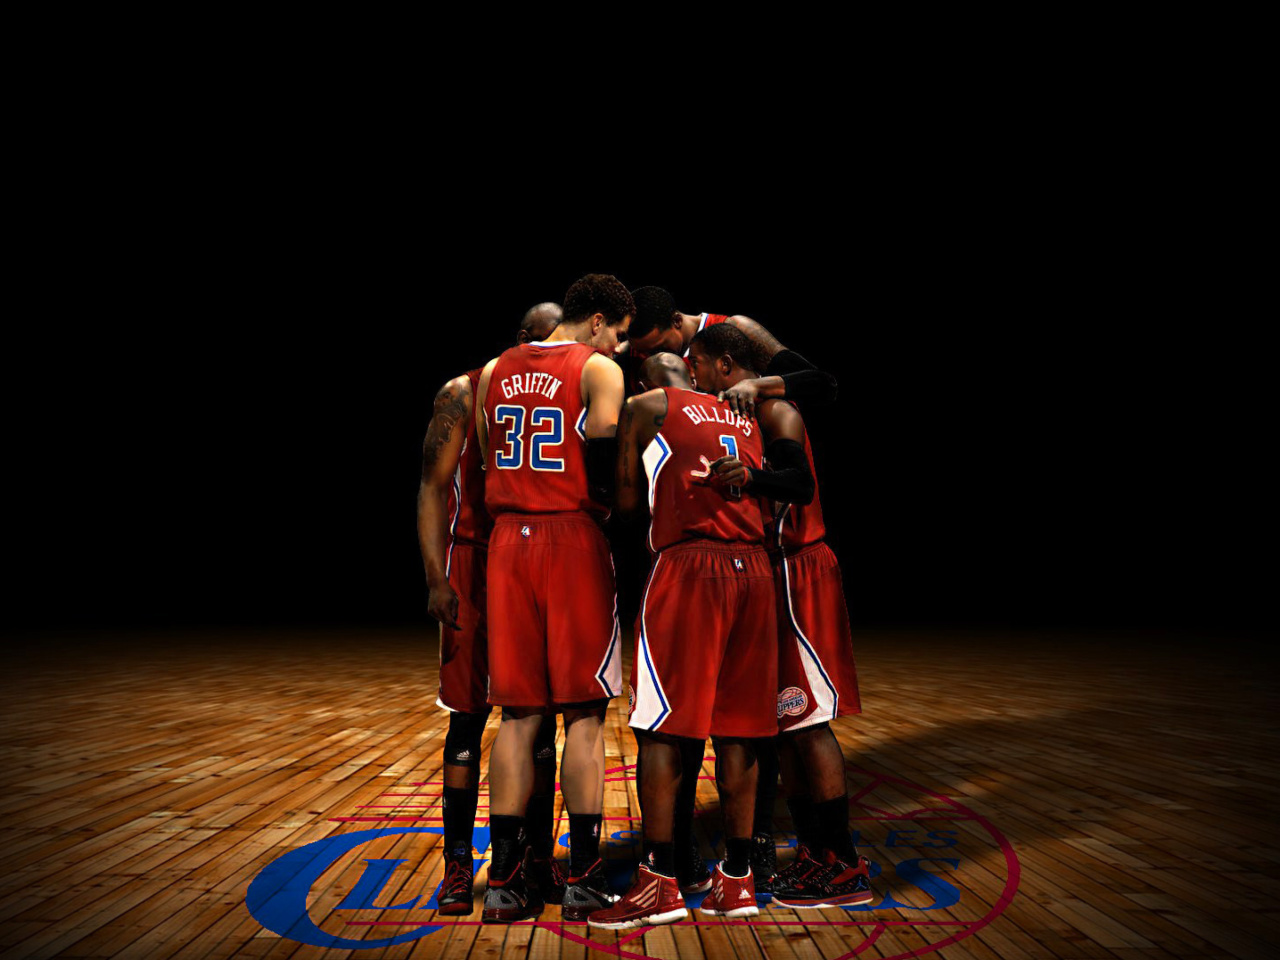 Los Angeles Clippers wallpaper 1280x960